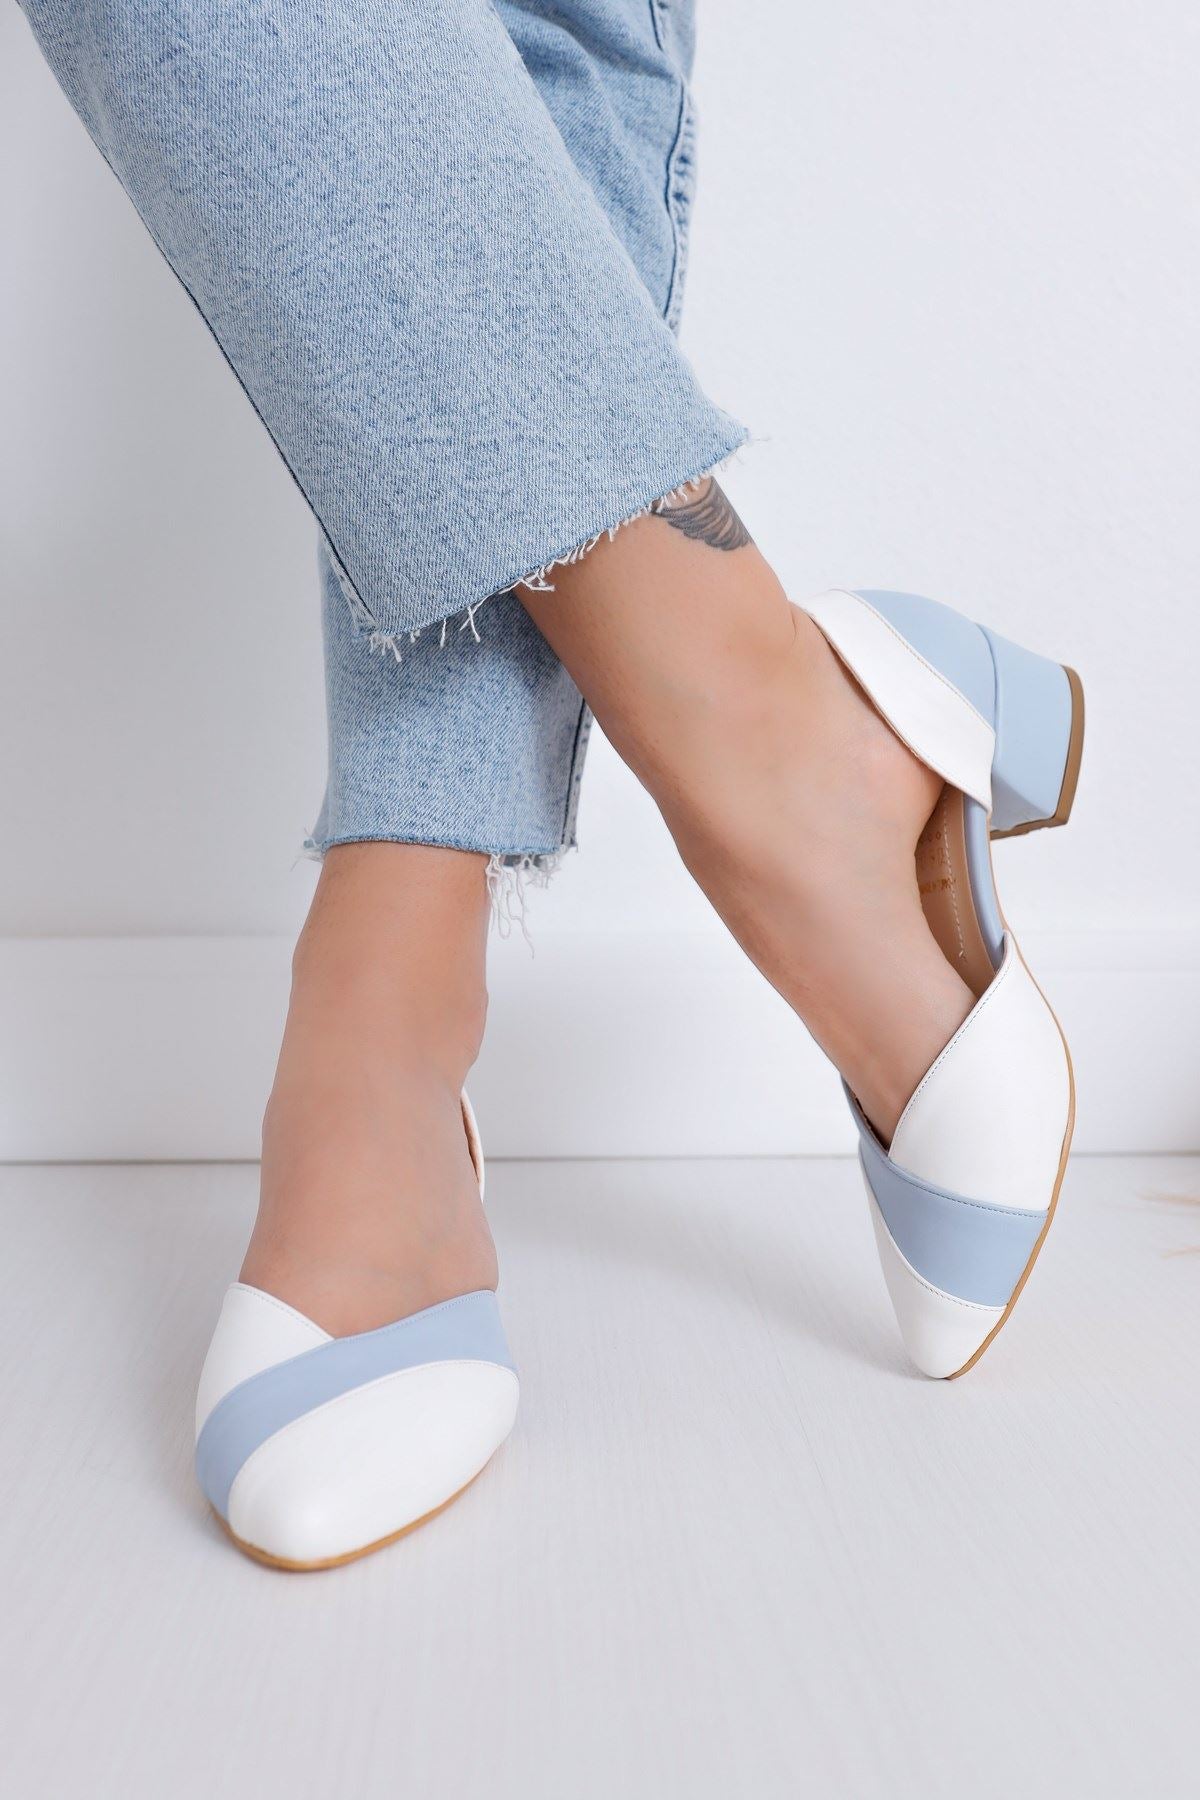 Women's Peggy Heels White-Baby Blue Skin Shoes - STREETMODE ™